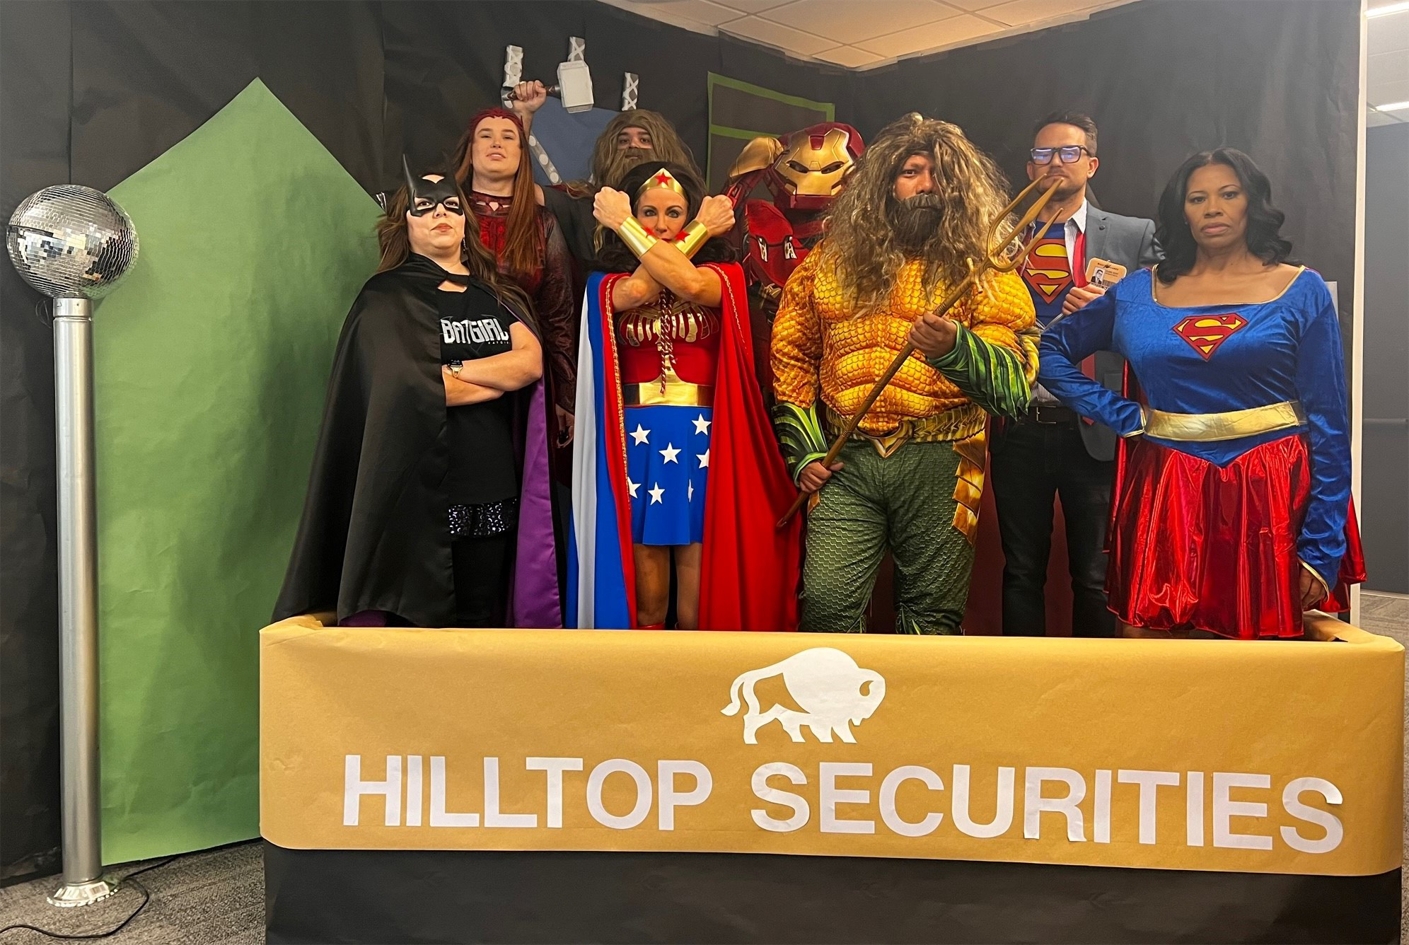 We work hard and play hard at HilltopSecurities! Having fun together is an important part of our corporate culture. Every Halloween, our employees go all out with their costumes and decorations to celebrate the day. Last year, our Clearing department were the real heroes with their amazing costume and full superhero set!